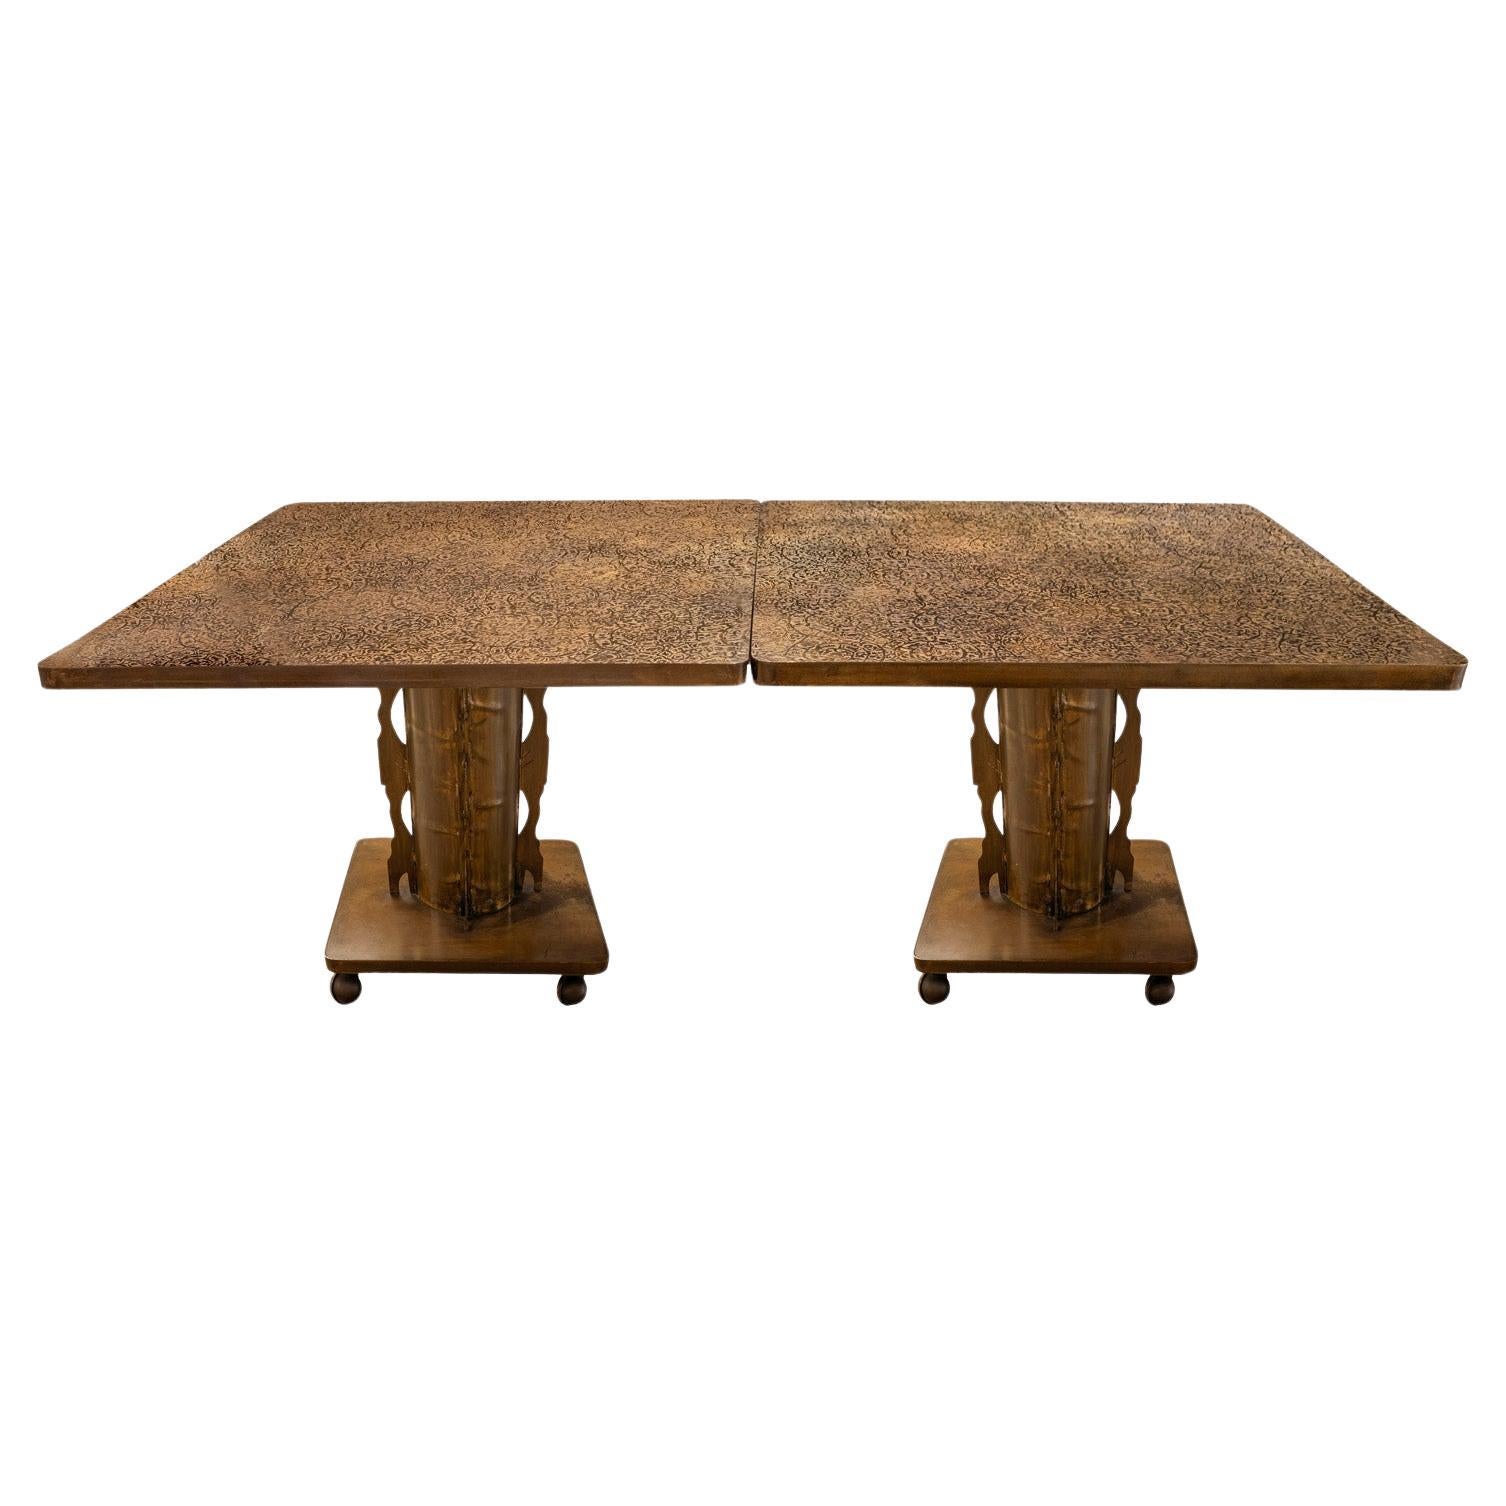 Philip and Kelvin LaVerne 2 piece "Etruscan Spiral Dining Table" 1960s (Signed) For Sale